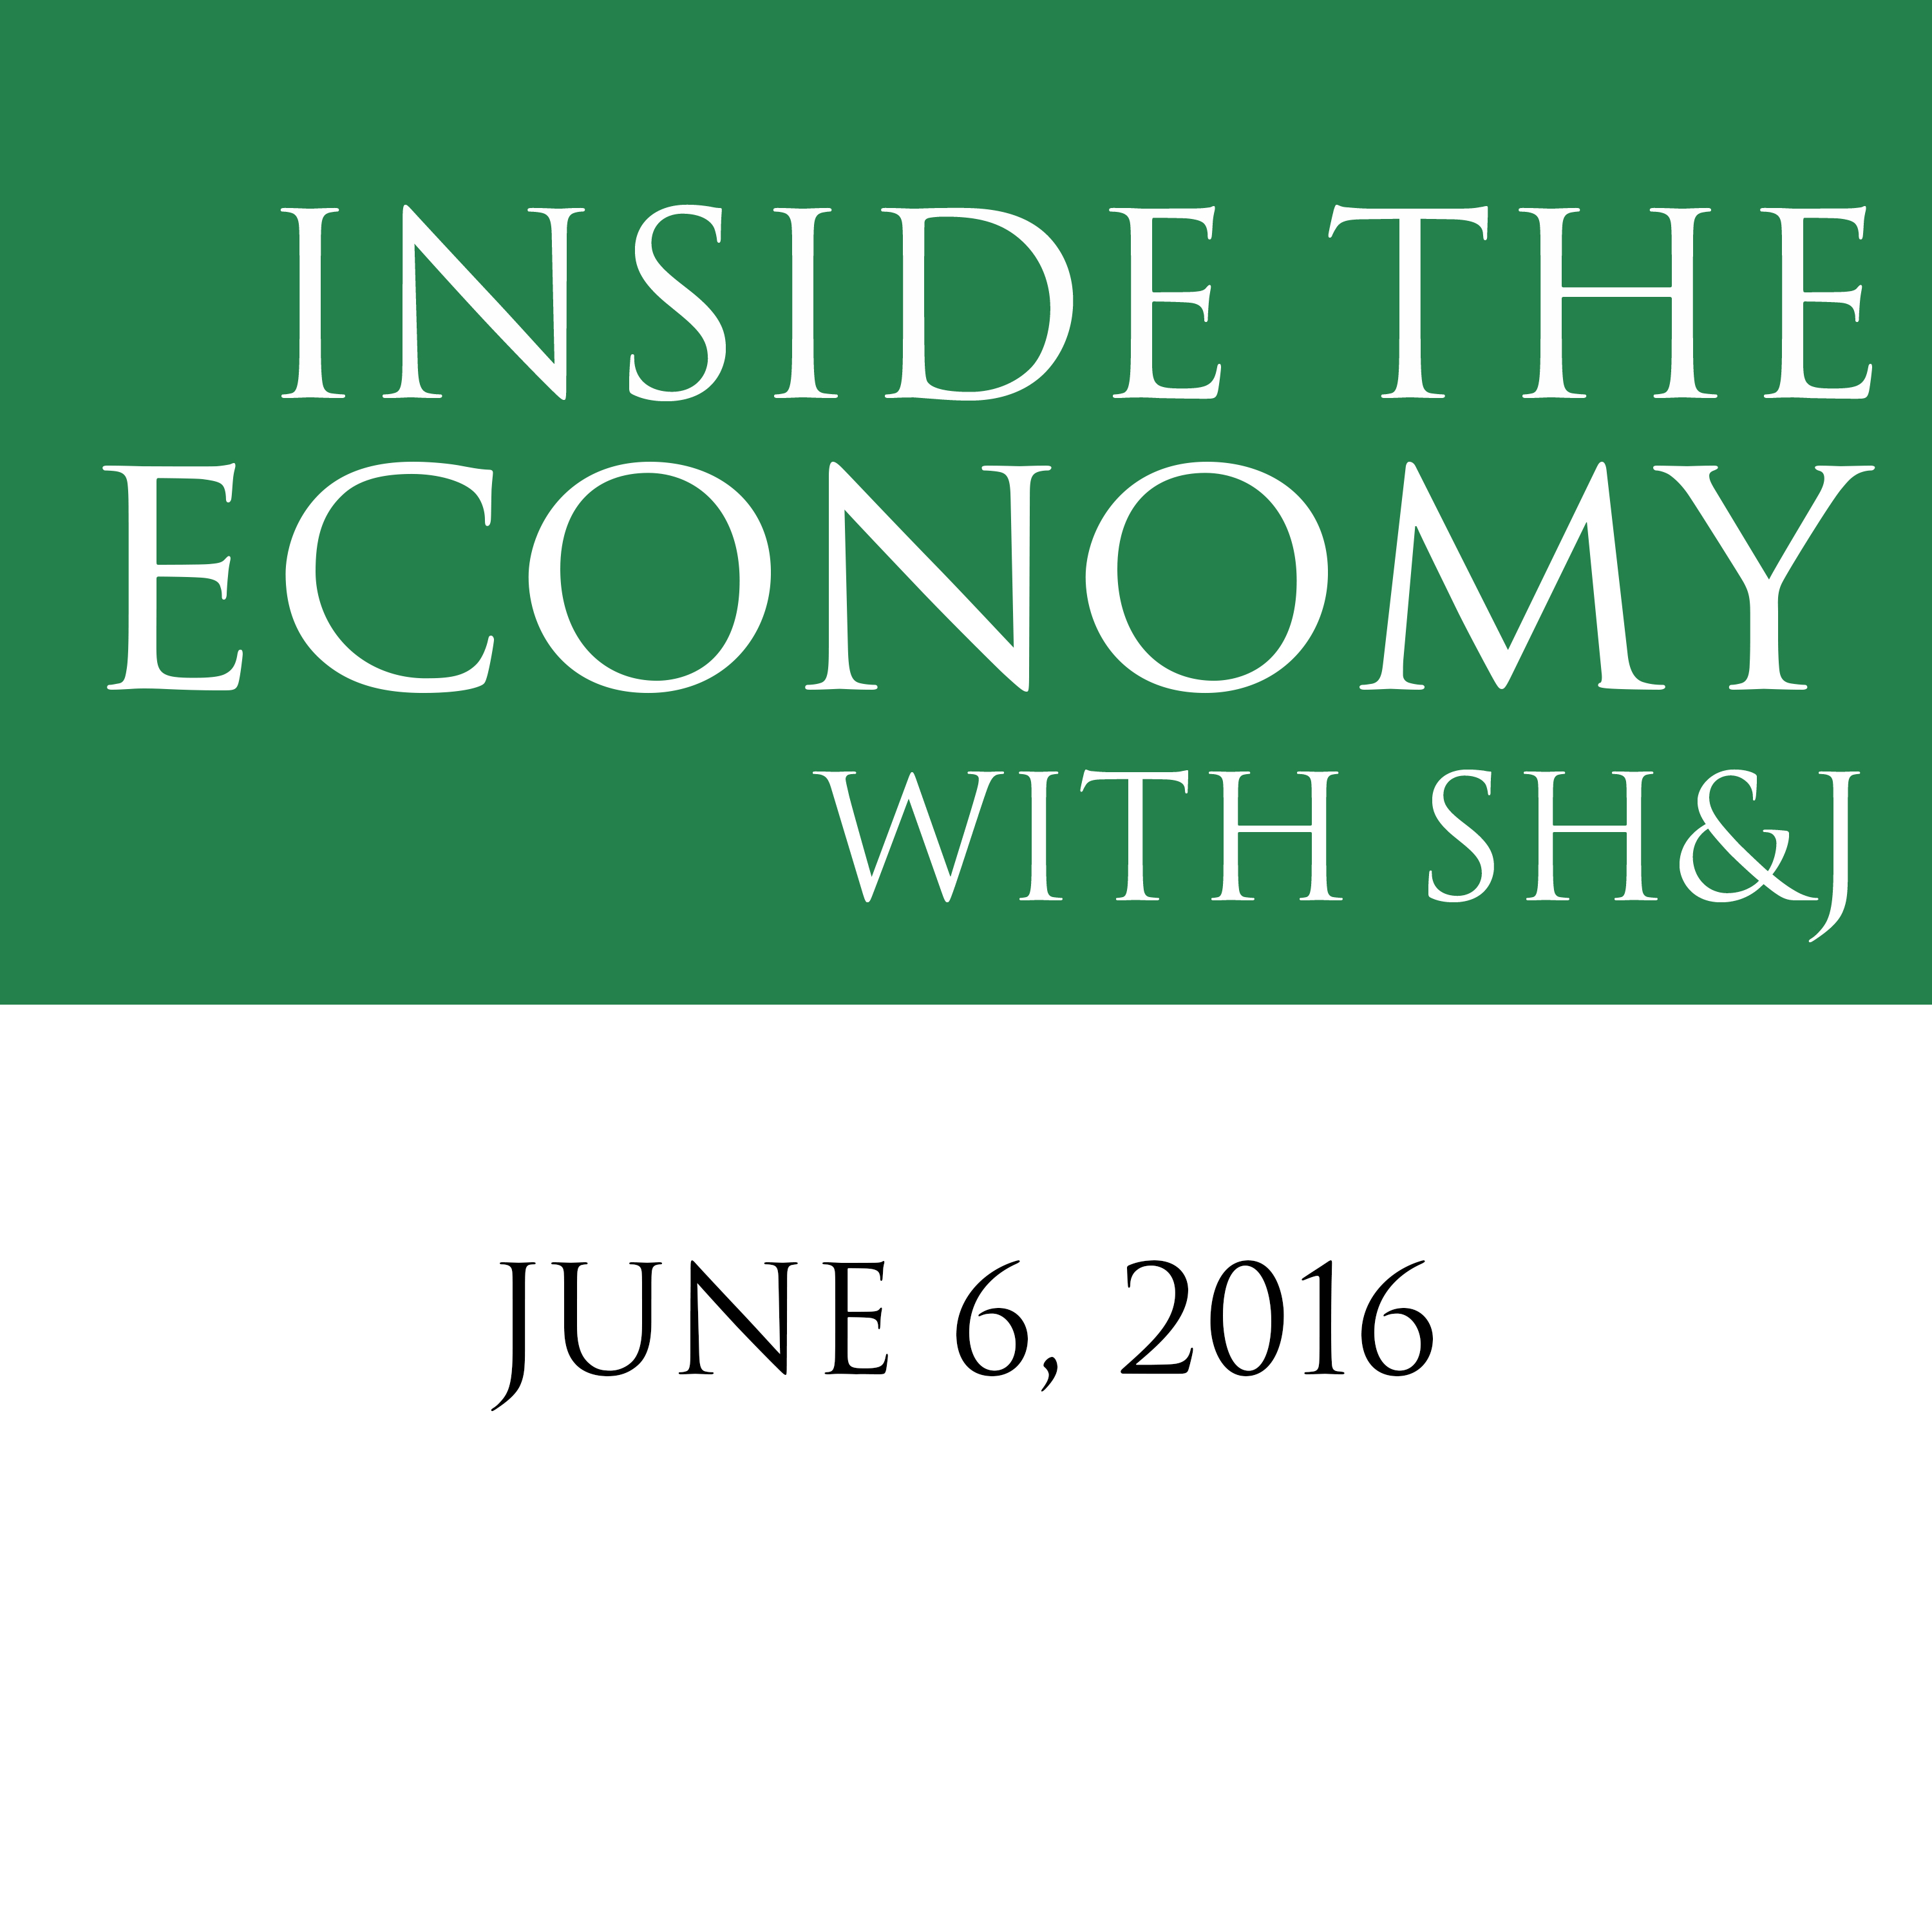 June 6, 2016  --  Inside the Economy With SH&J